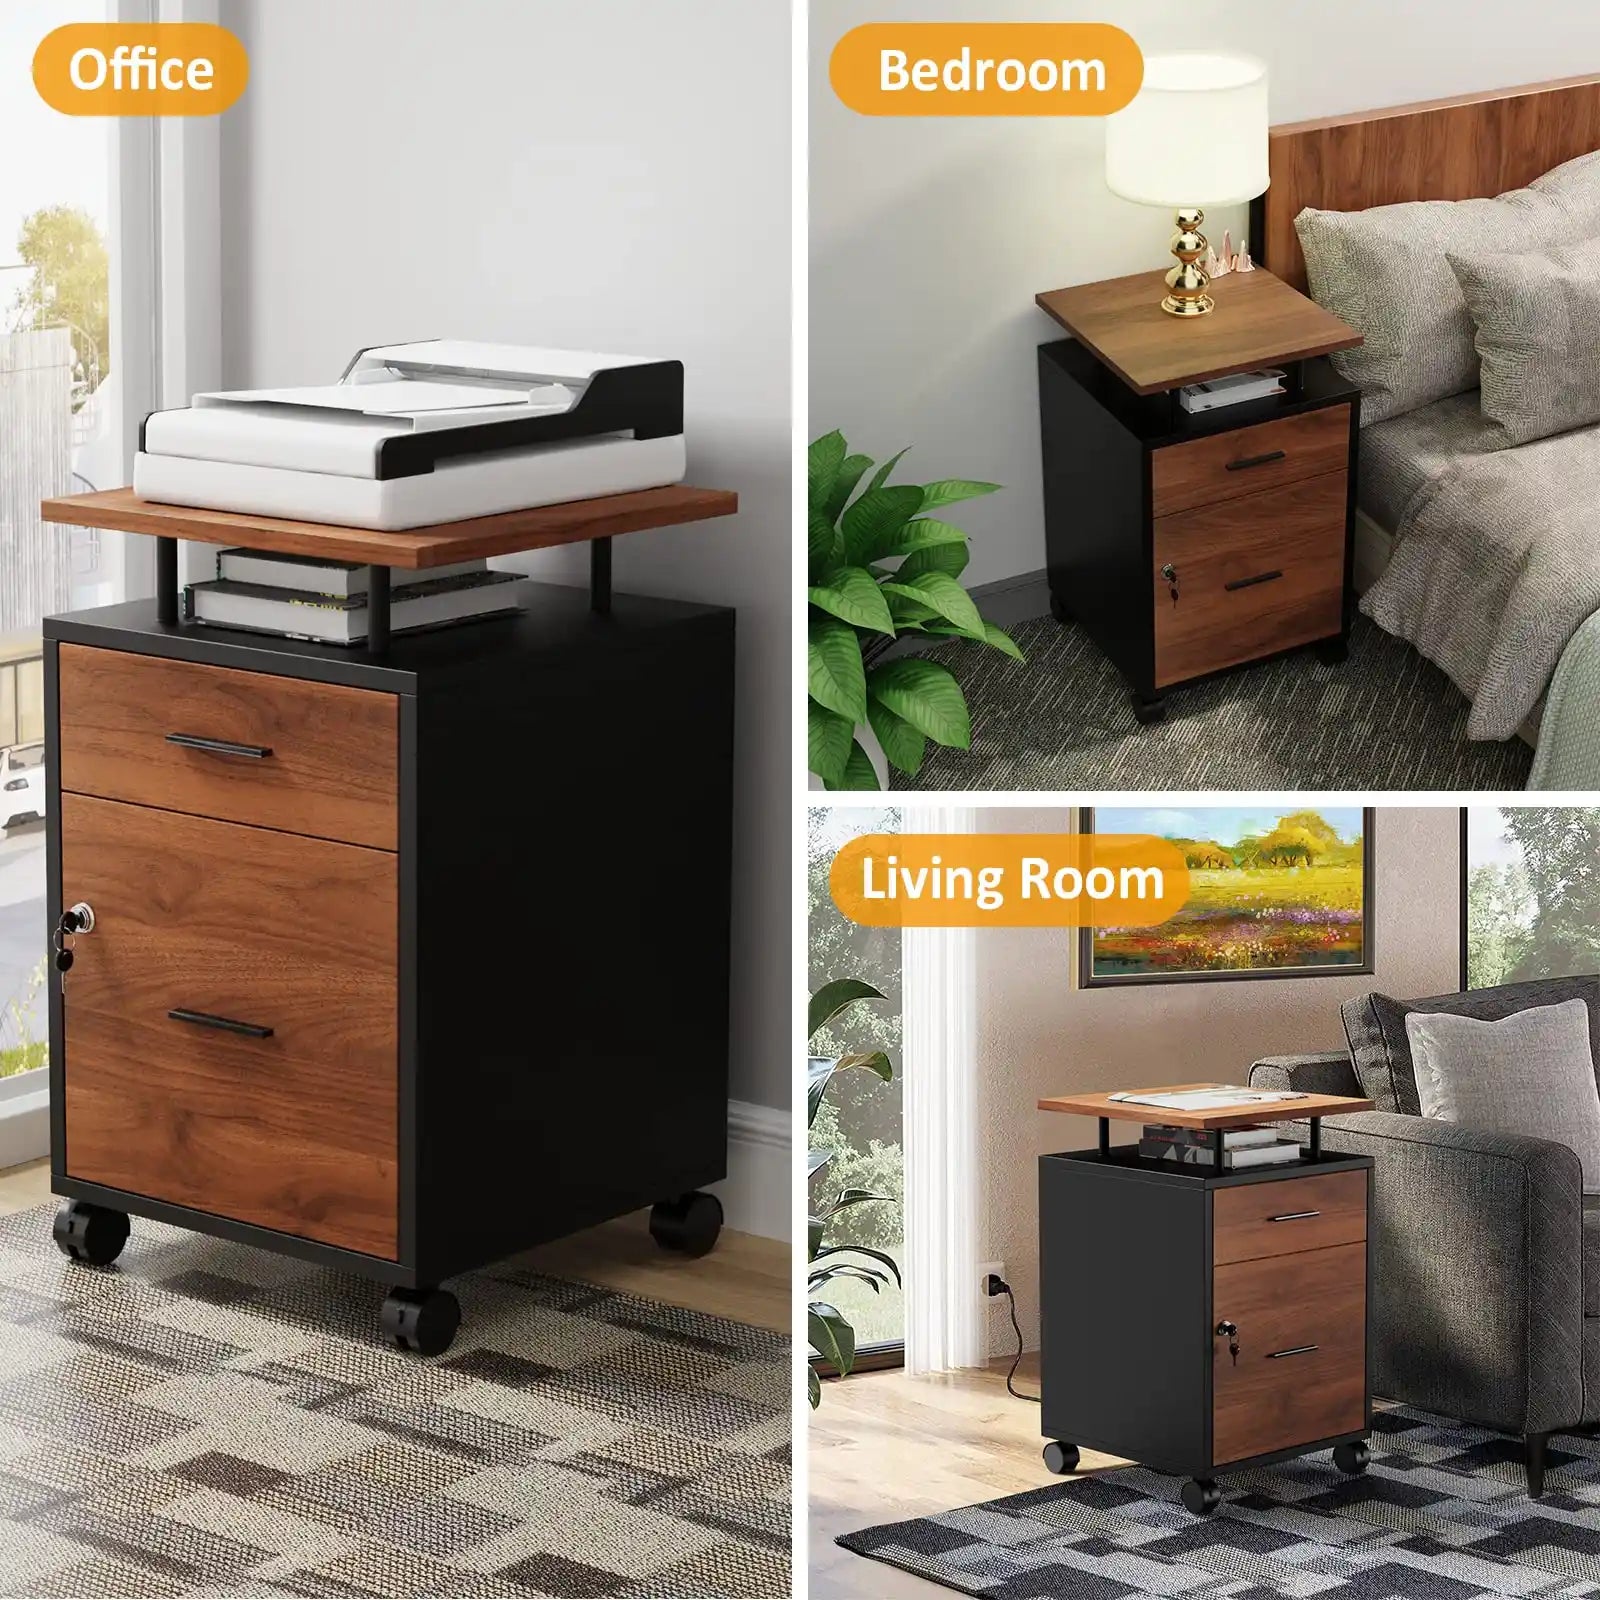 2-Tier File Cabinet with 1 Locked or 2 Locked